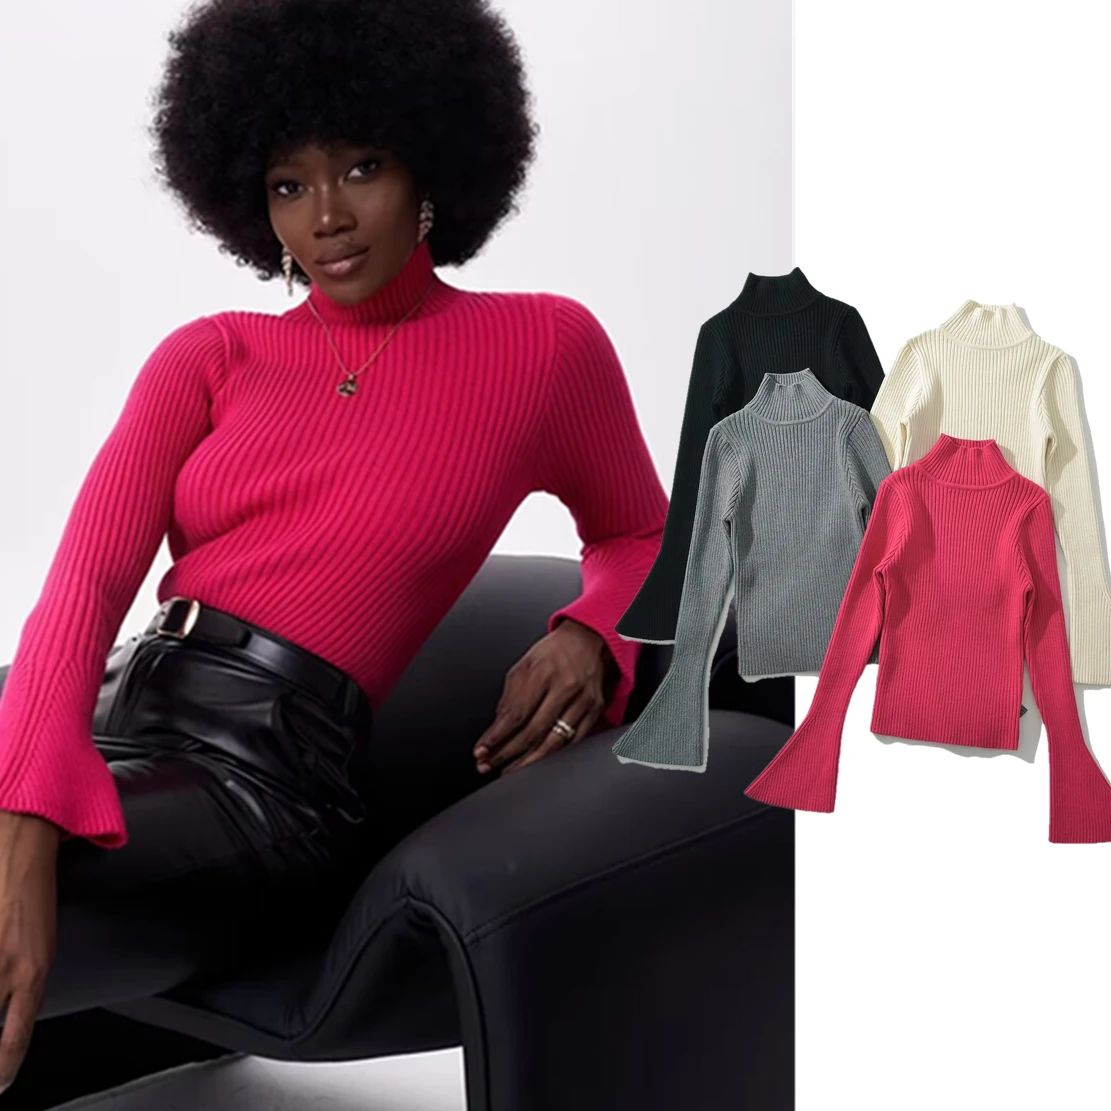 

Withered French Fashion Women's Basic Knitwear Tops For Winter High Neck Flare Sleeves Elegant Pullover Sweater Women